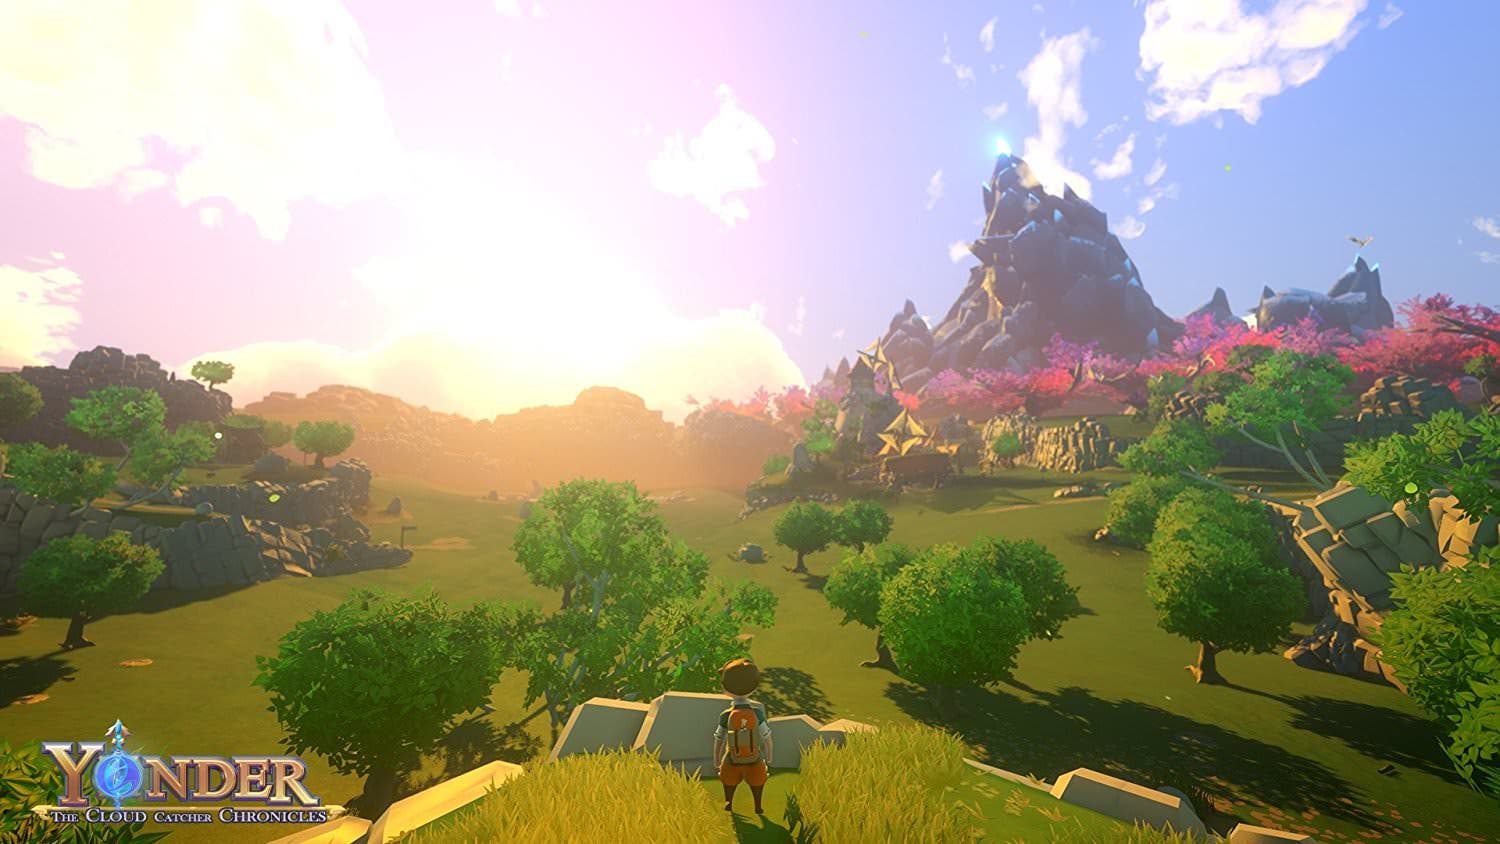 Anunciado Yonder: The Cloud Catcher Chronicles para Switch